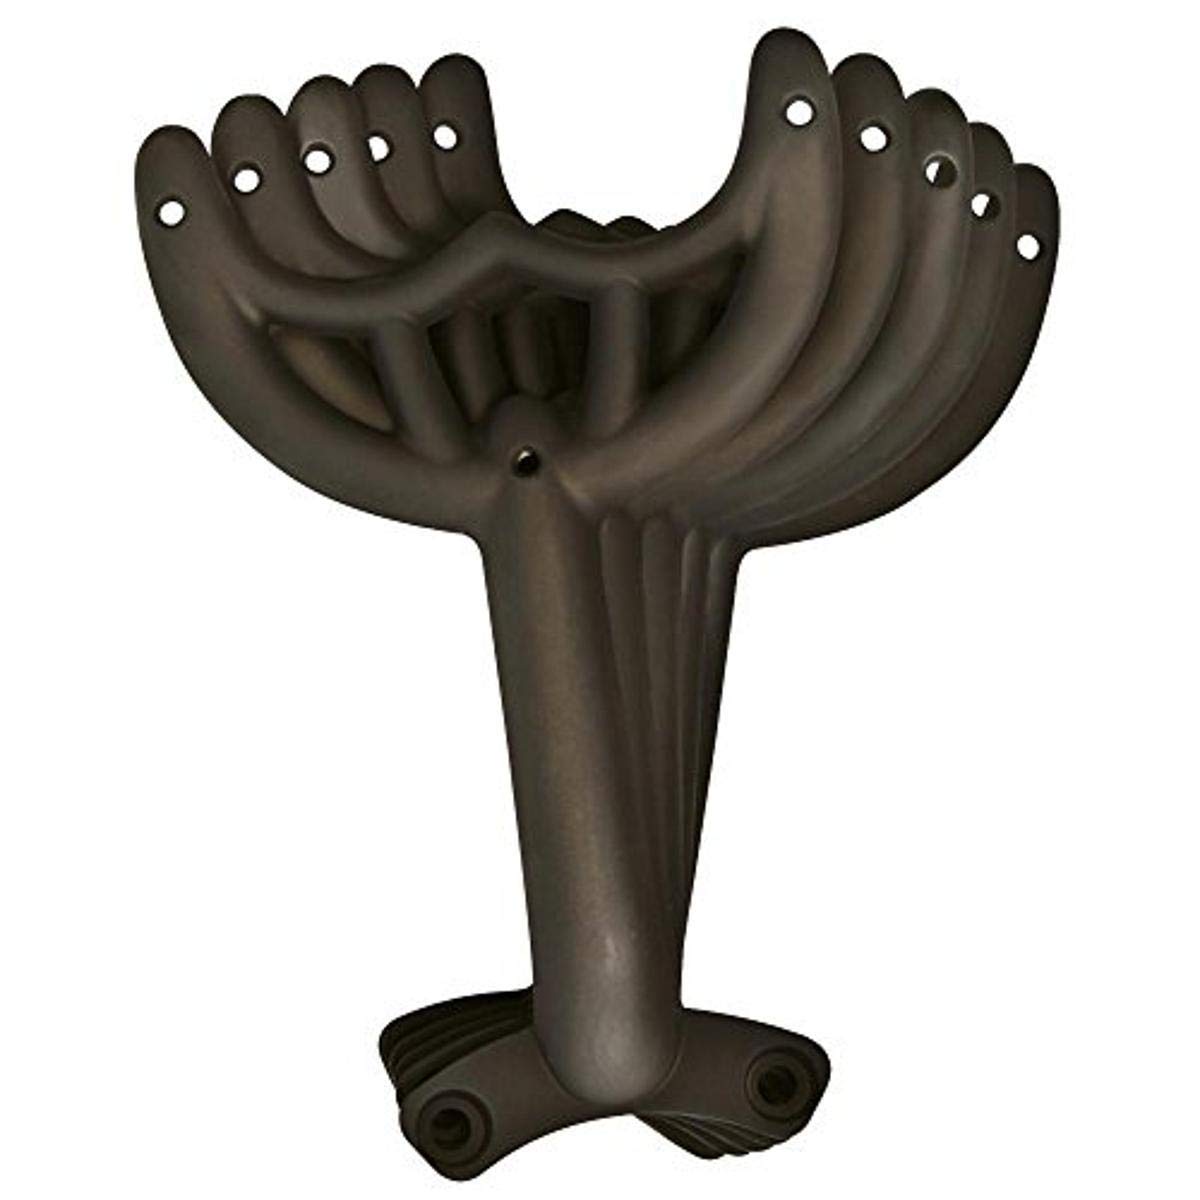 52" Oil Rubbed Bronze Finish Replacement Fan Blade Arms